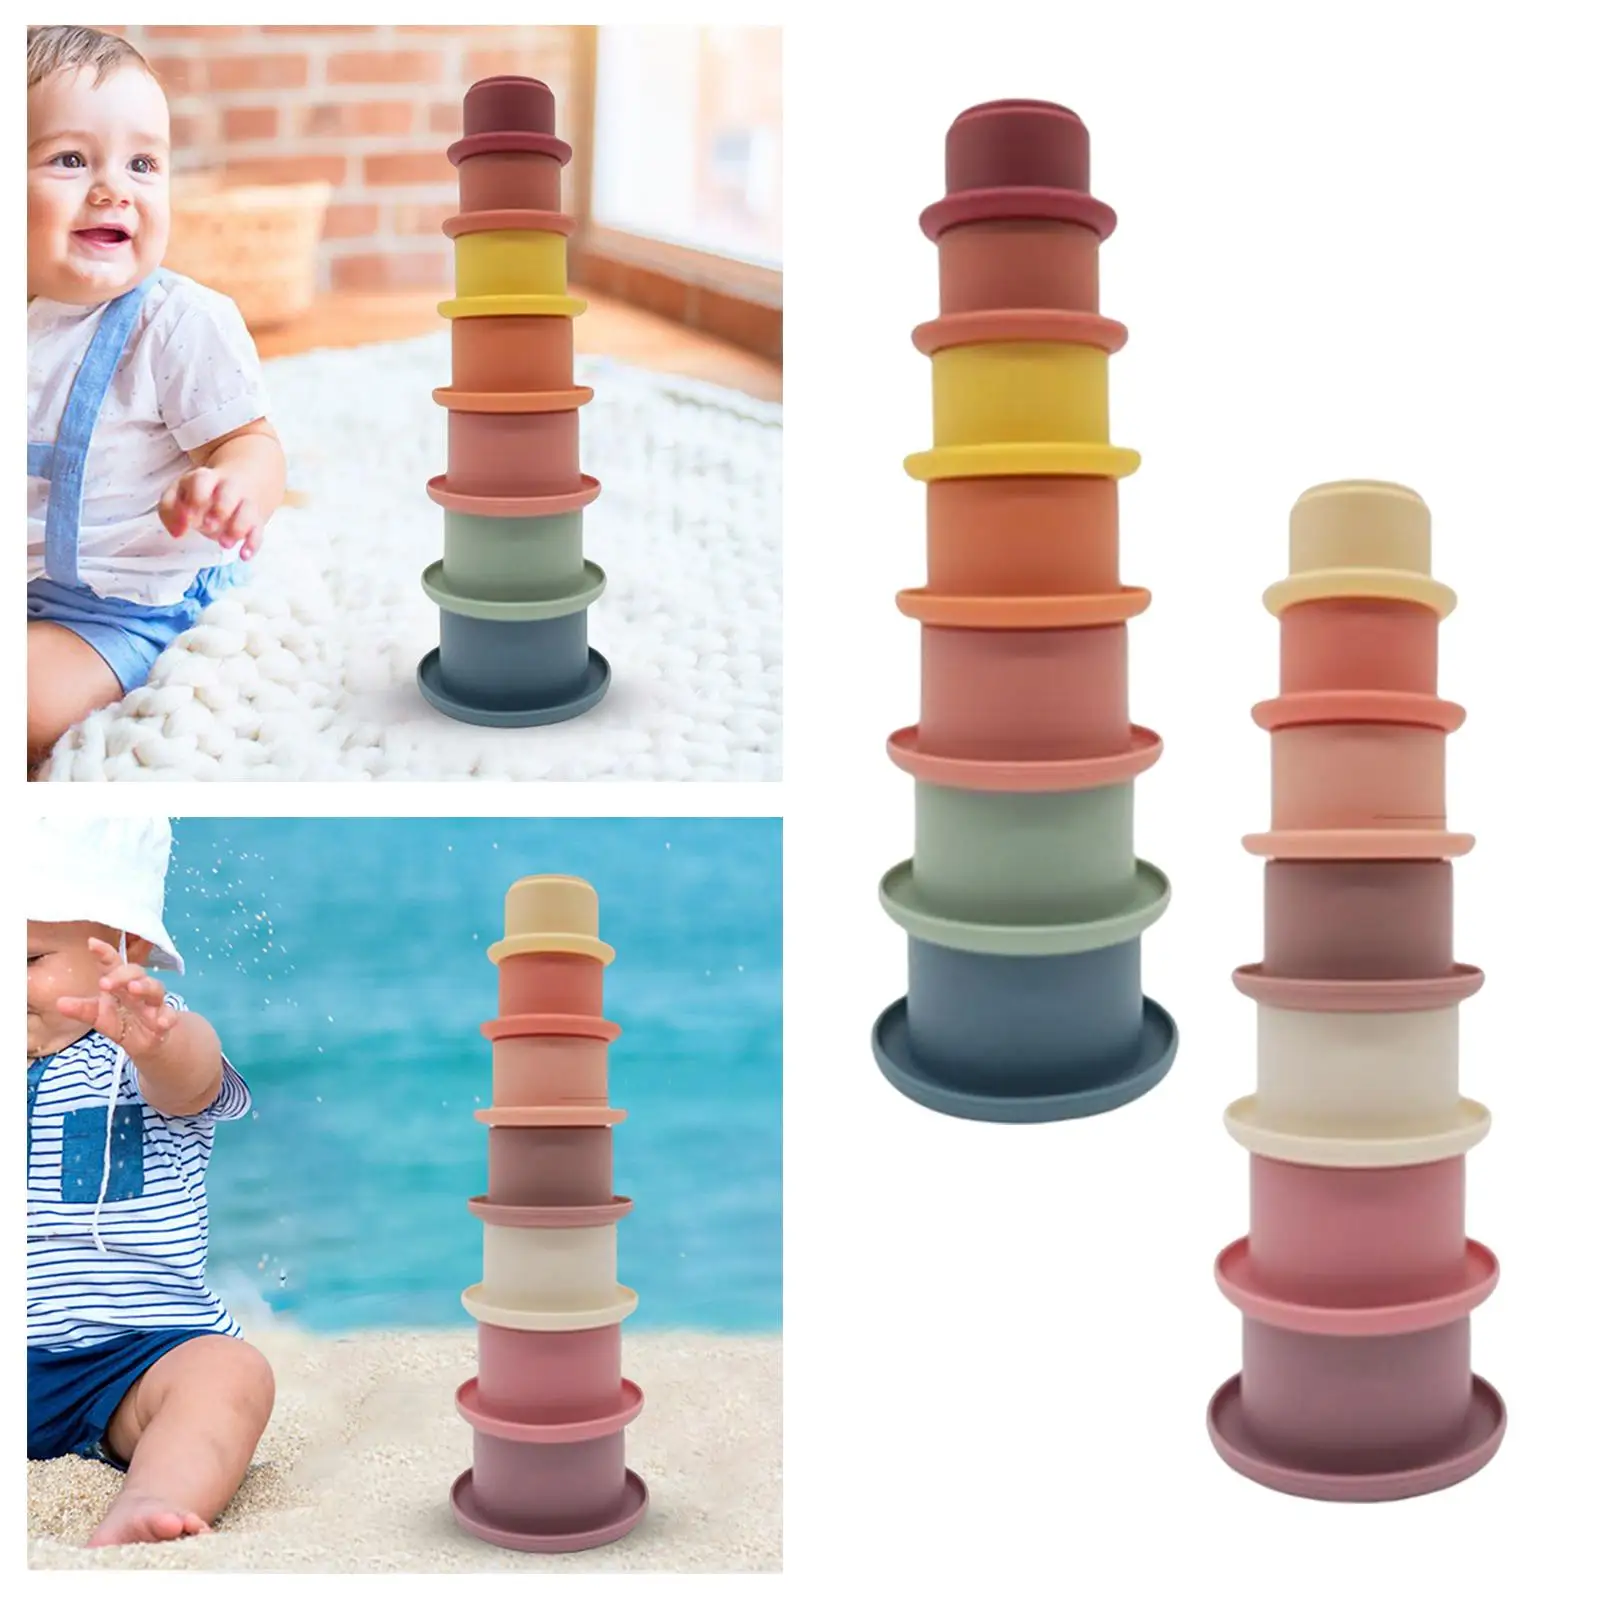 7 Pieces Stacking Cups Toy Bathtub Toys Early Educational Develop Silicone Nesting Cups Stack up Cup for Boys Girls Kids Baby